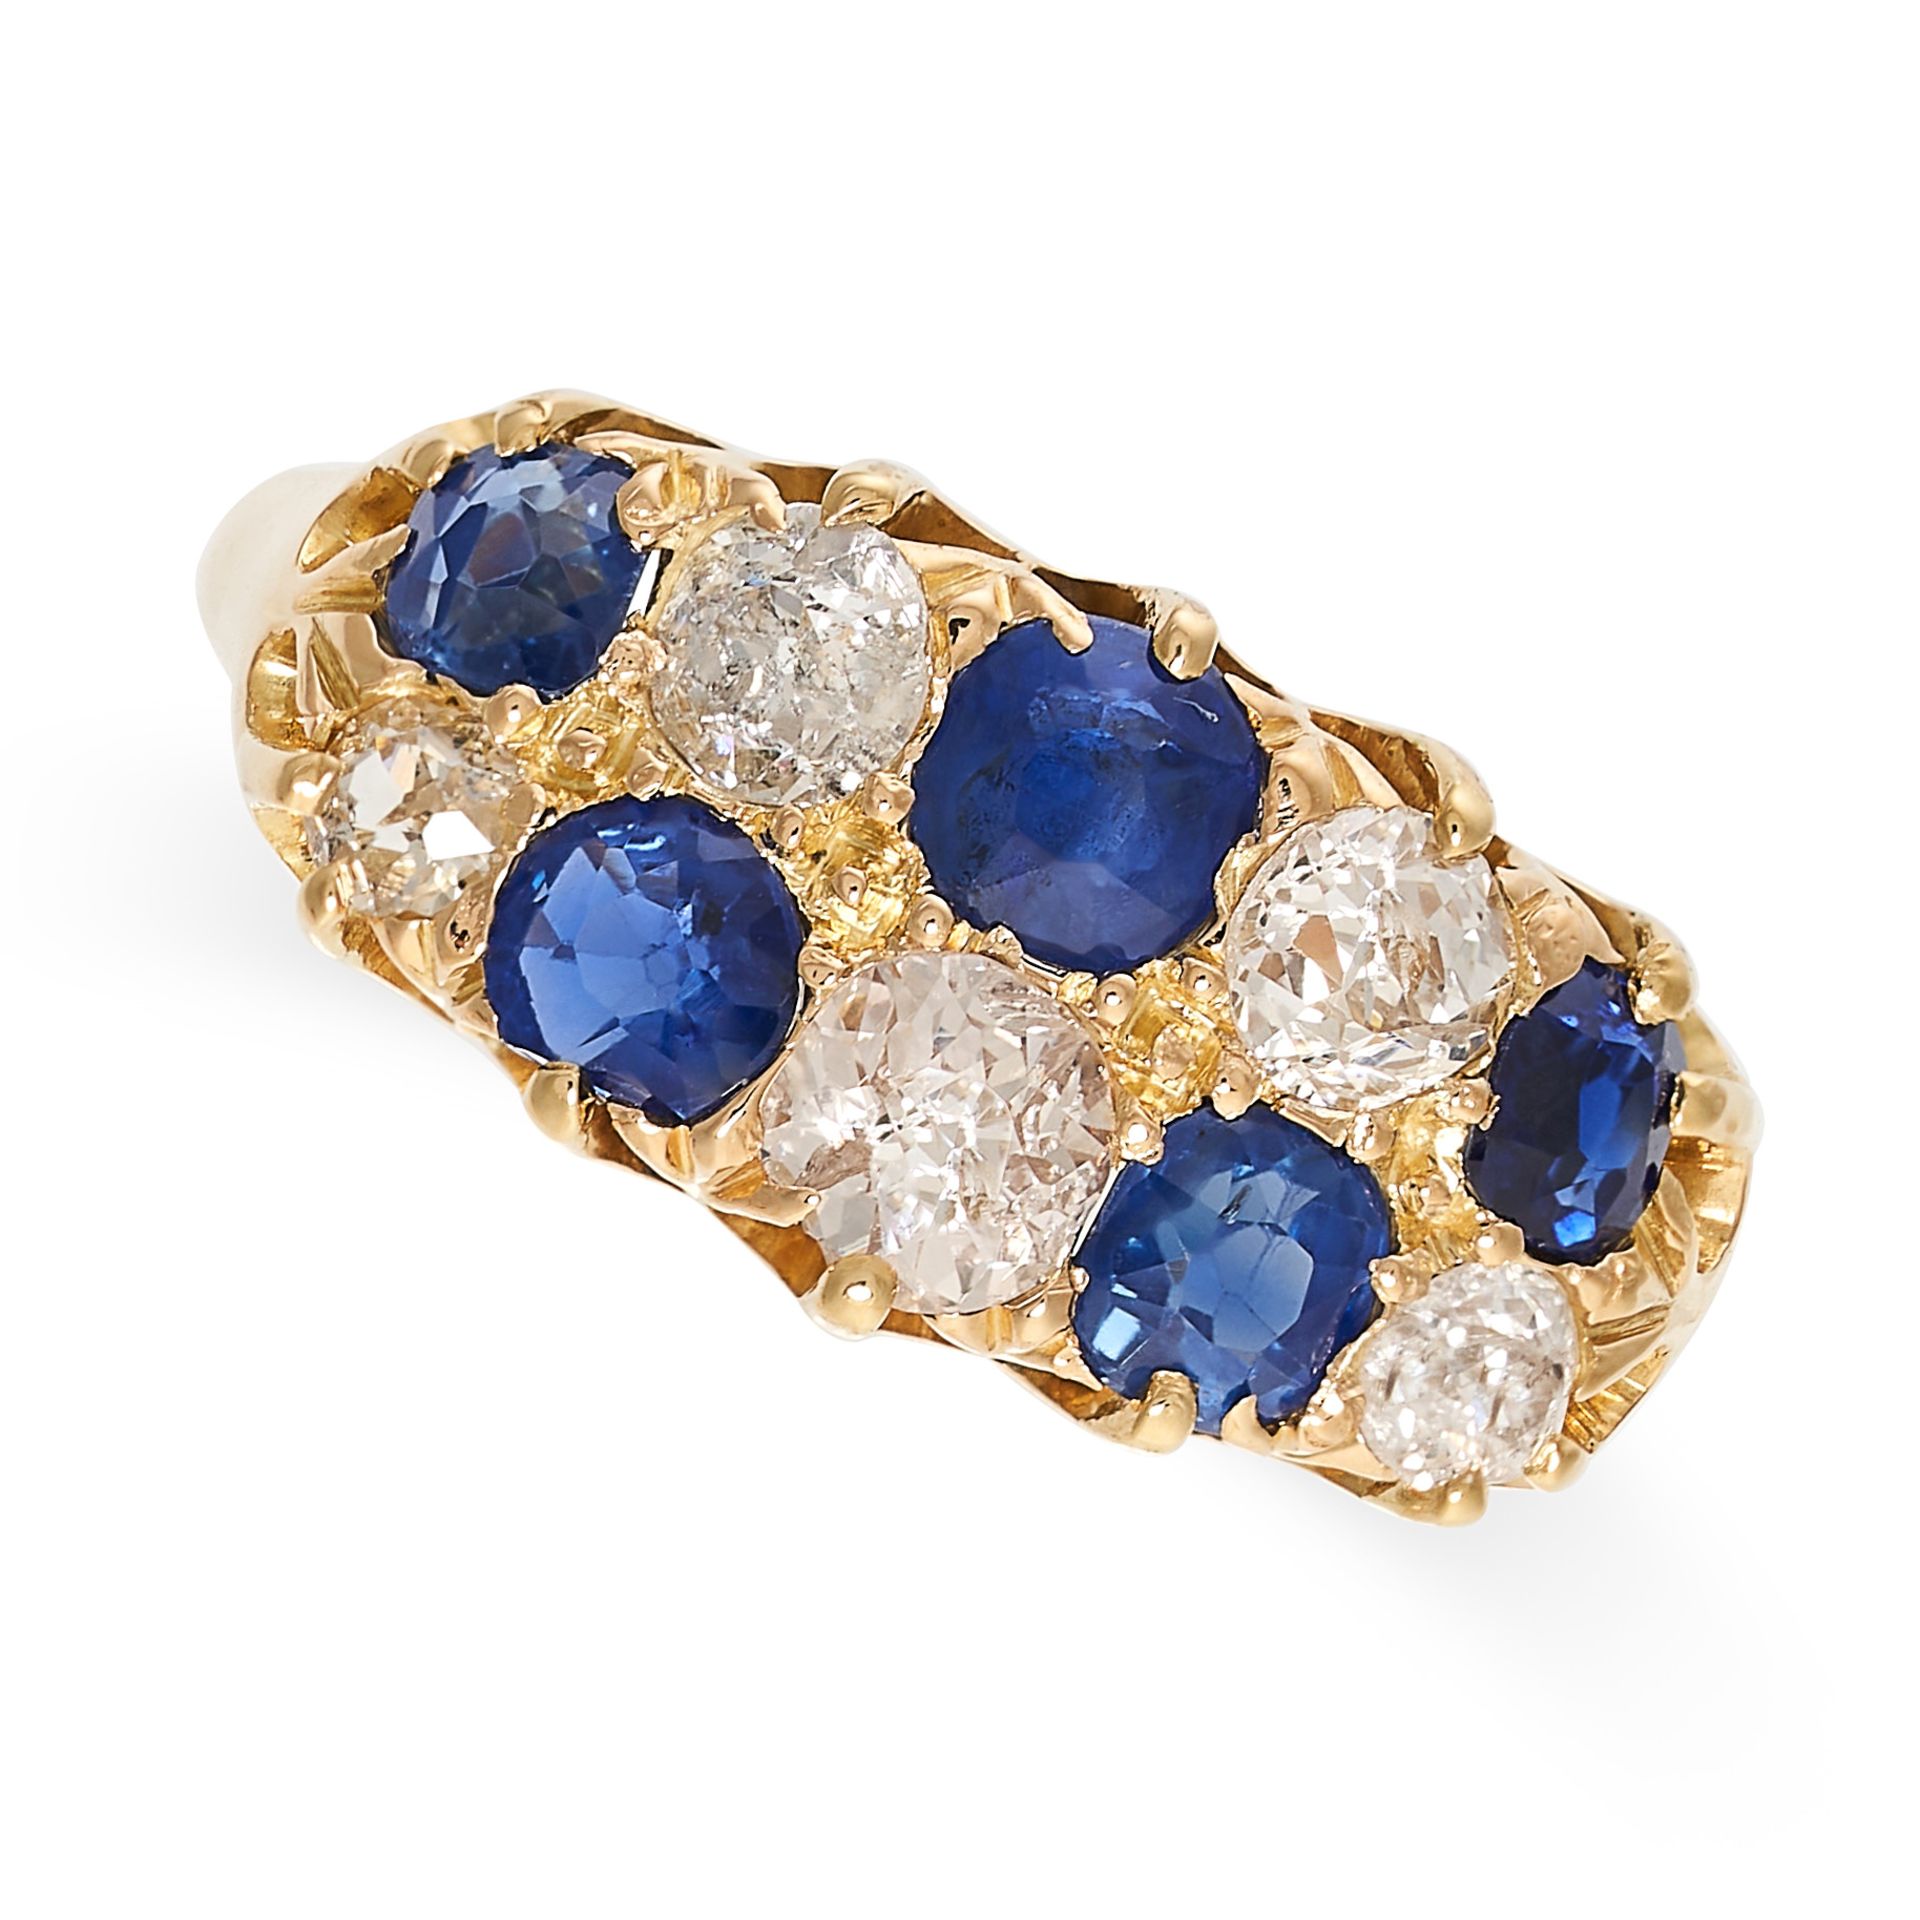 AN ANTIQUE VICTORIAN SAPPHIRE AND DIAMOND DRESS RING in 18ct yellow gold, the face set with